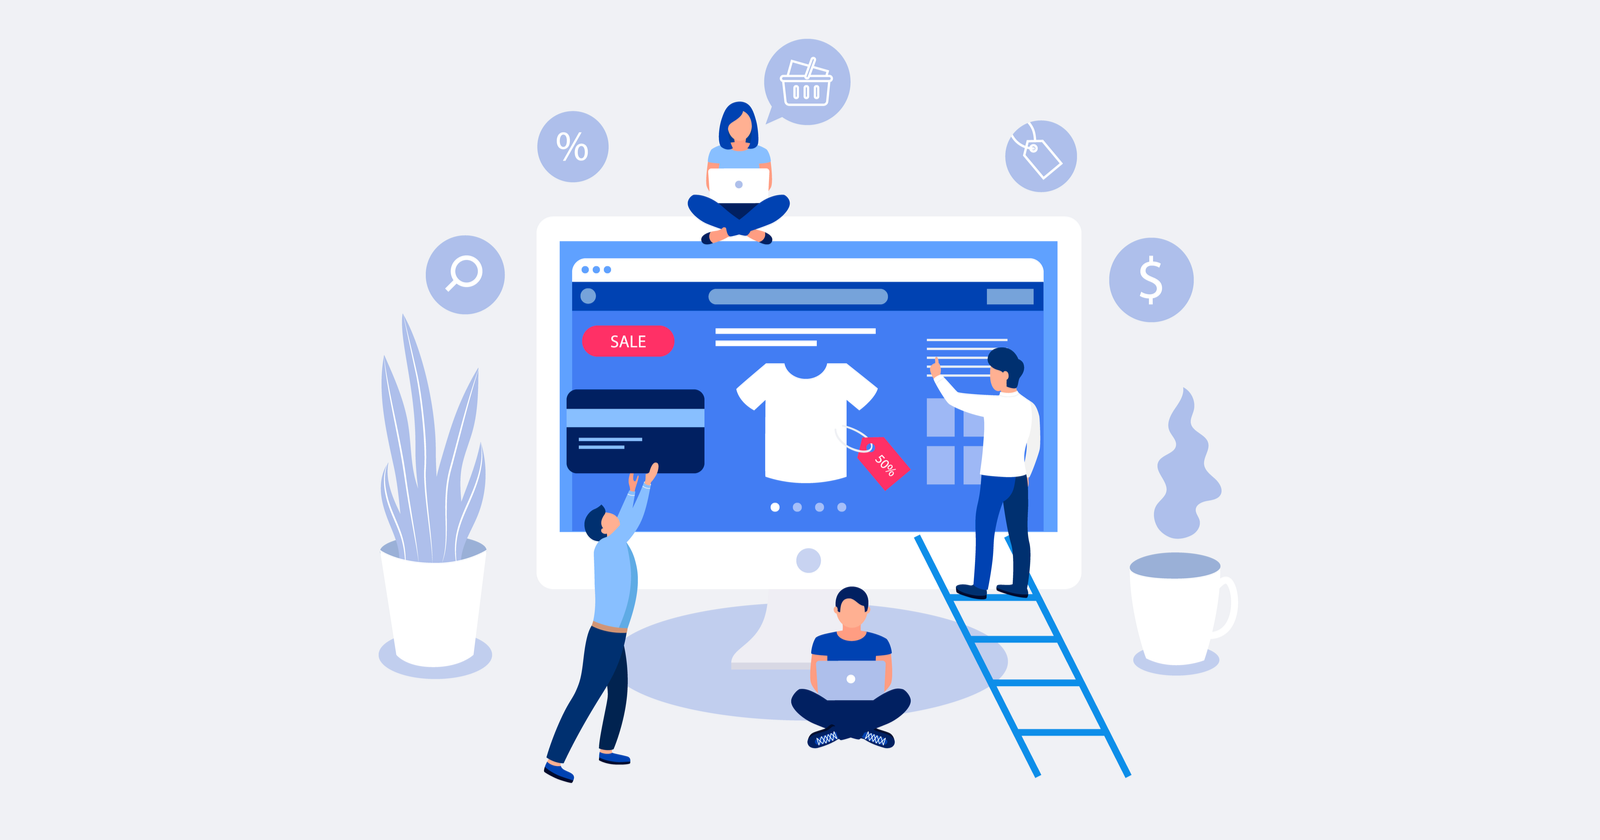 Plan and build your eCommerce website